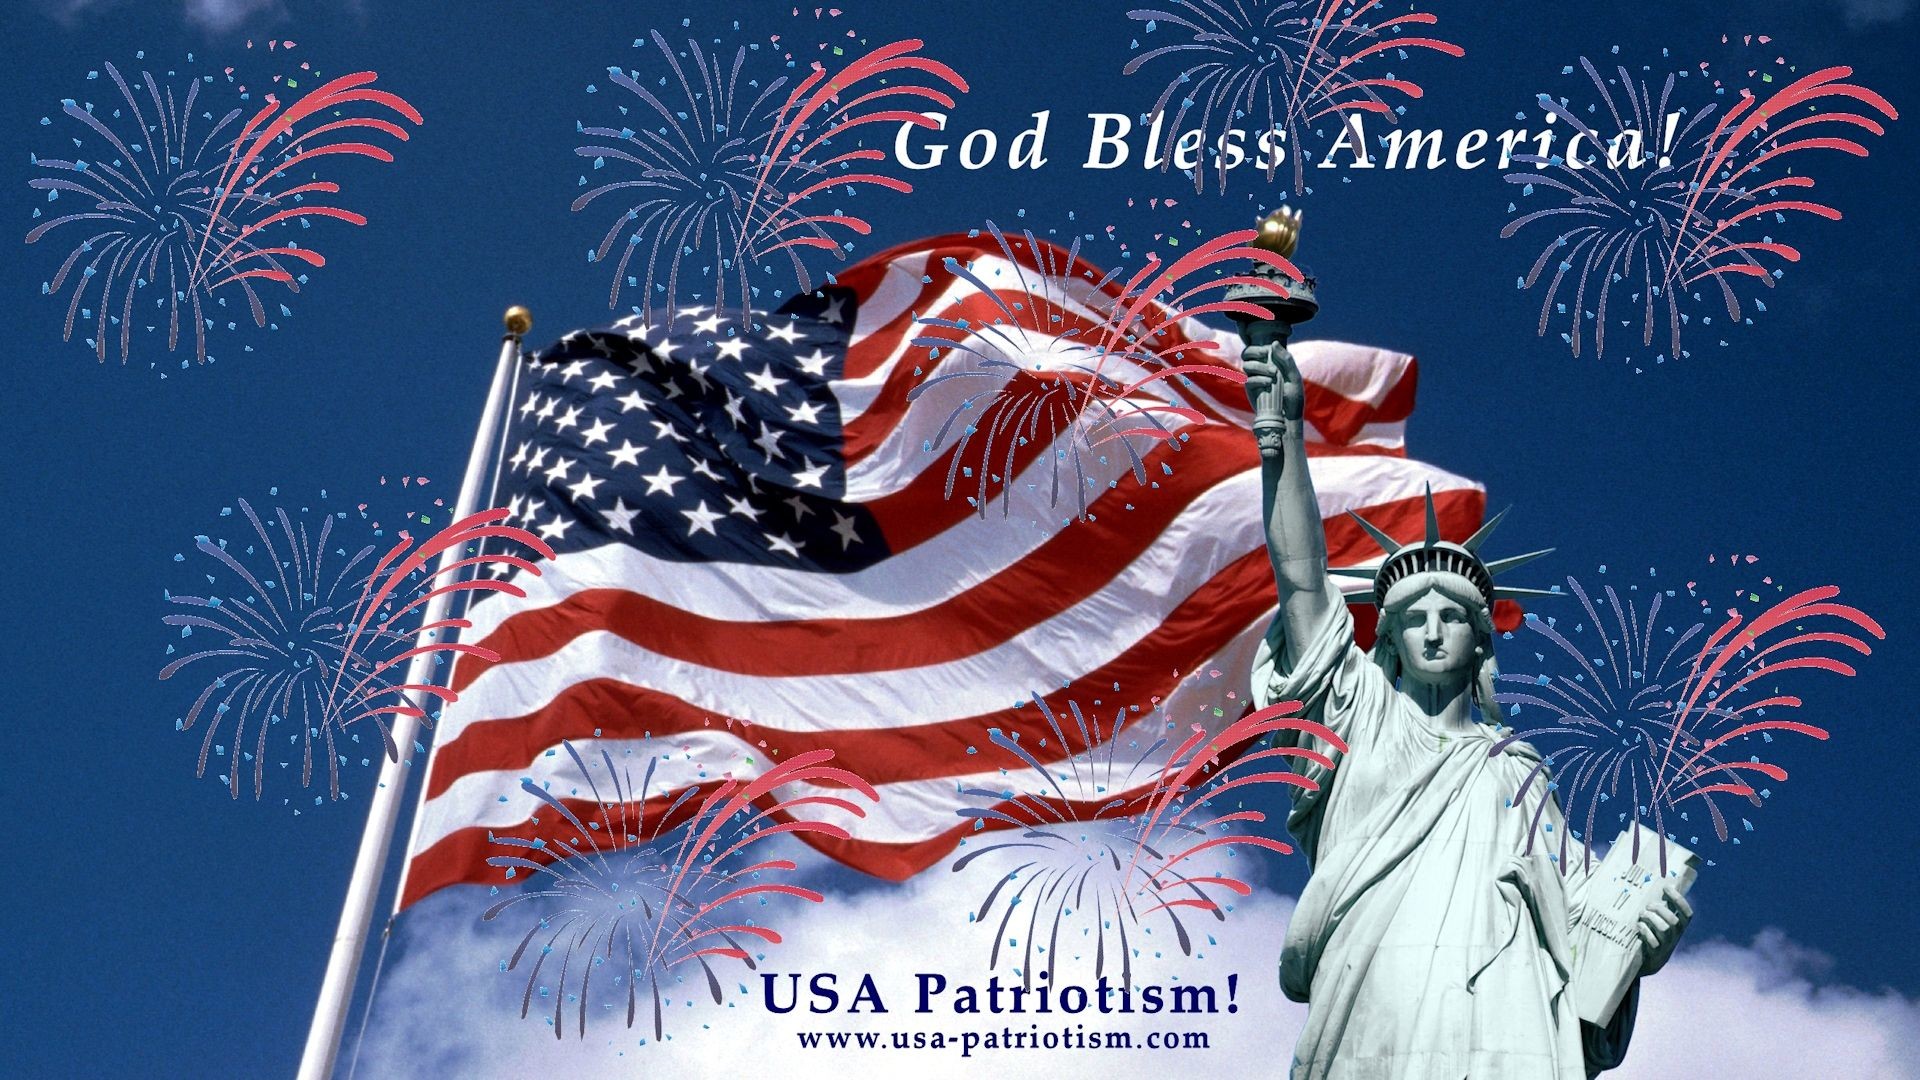 ... God Bless America with fireworks background for wide screen TVs and mon...